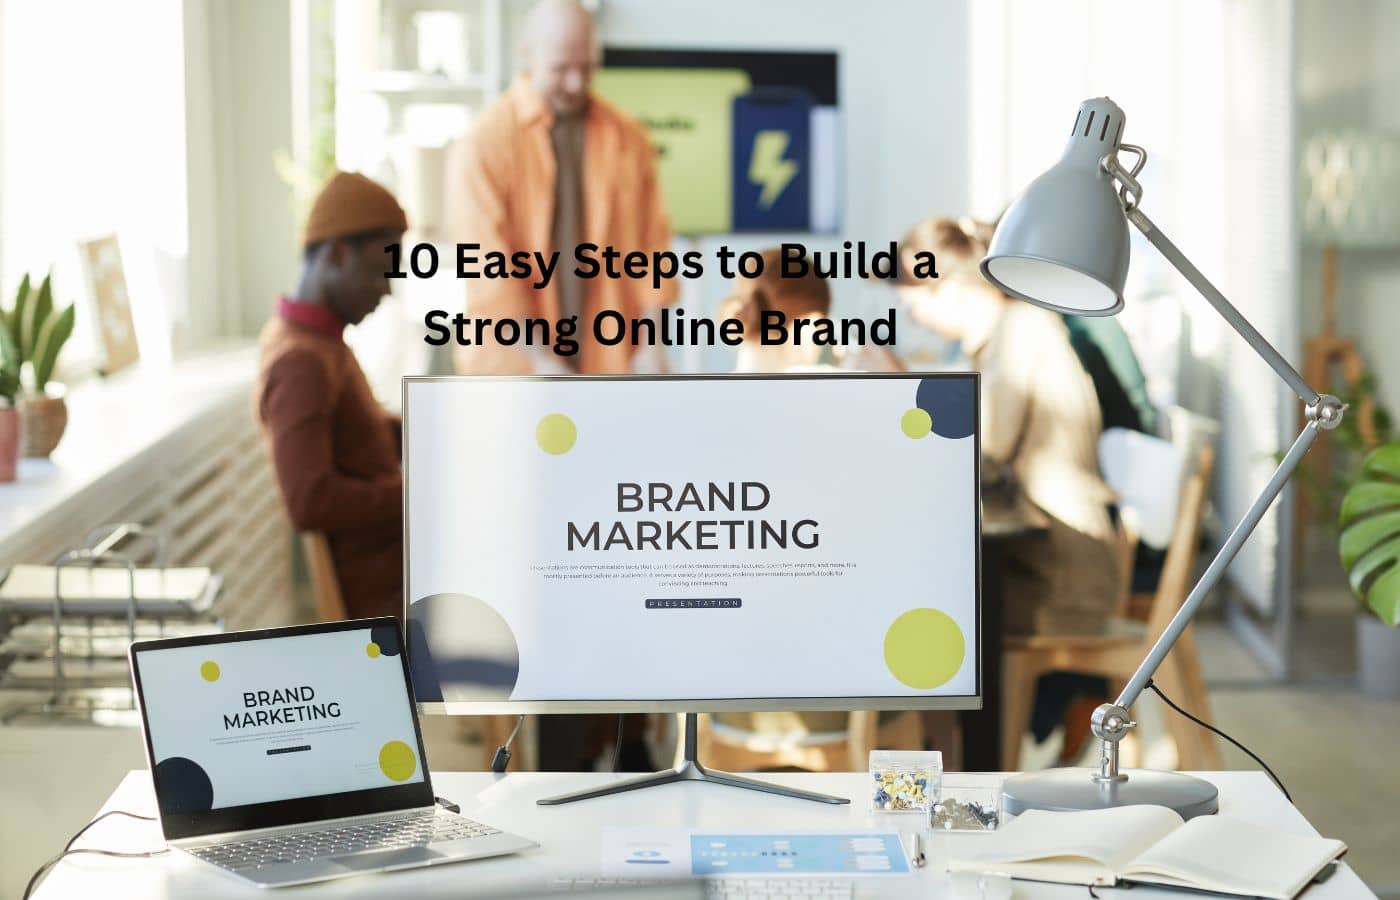 Steps to Build a Strong Online Brand